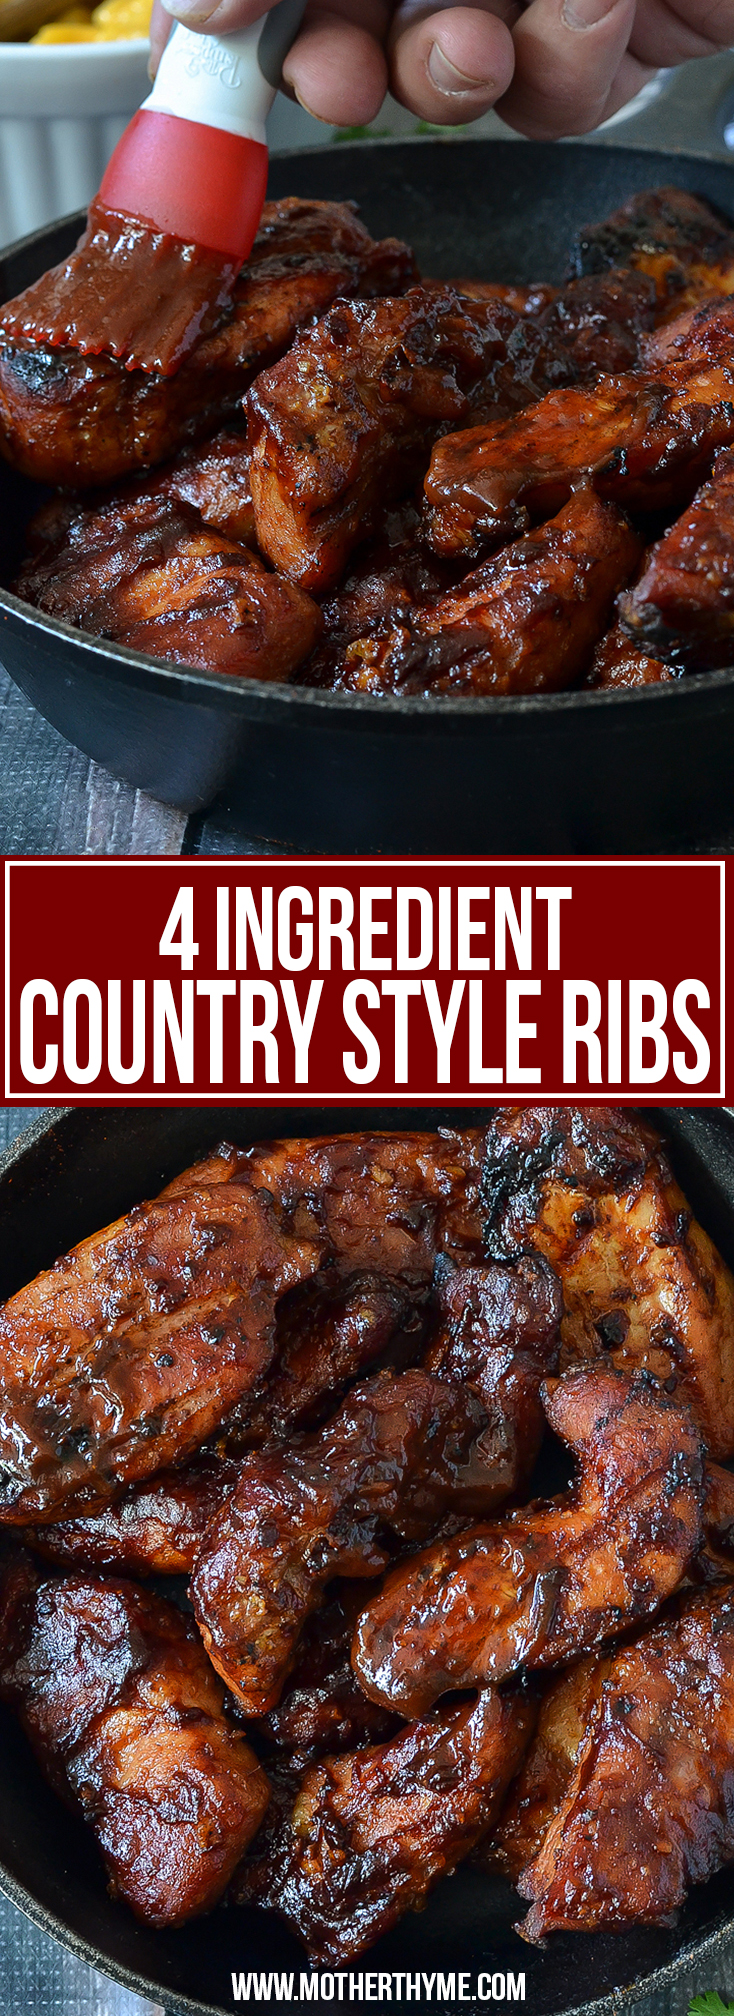 4 INGREDIENT COUNTRY STYLE RIBS